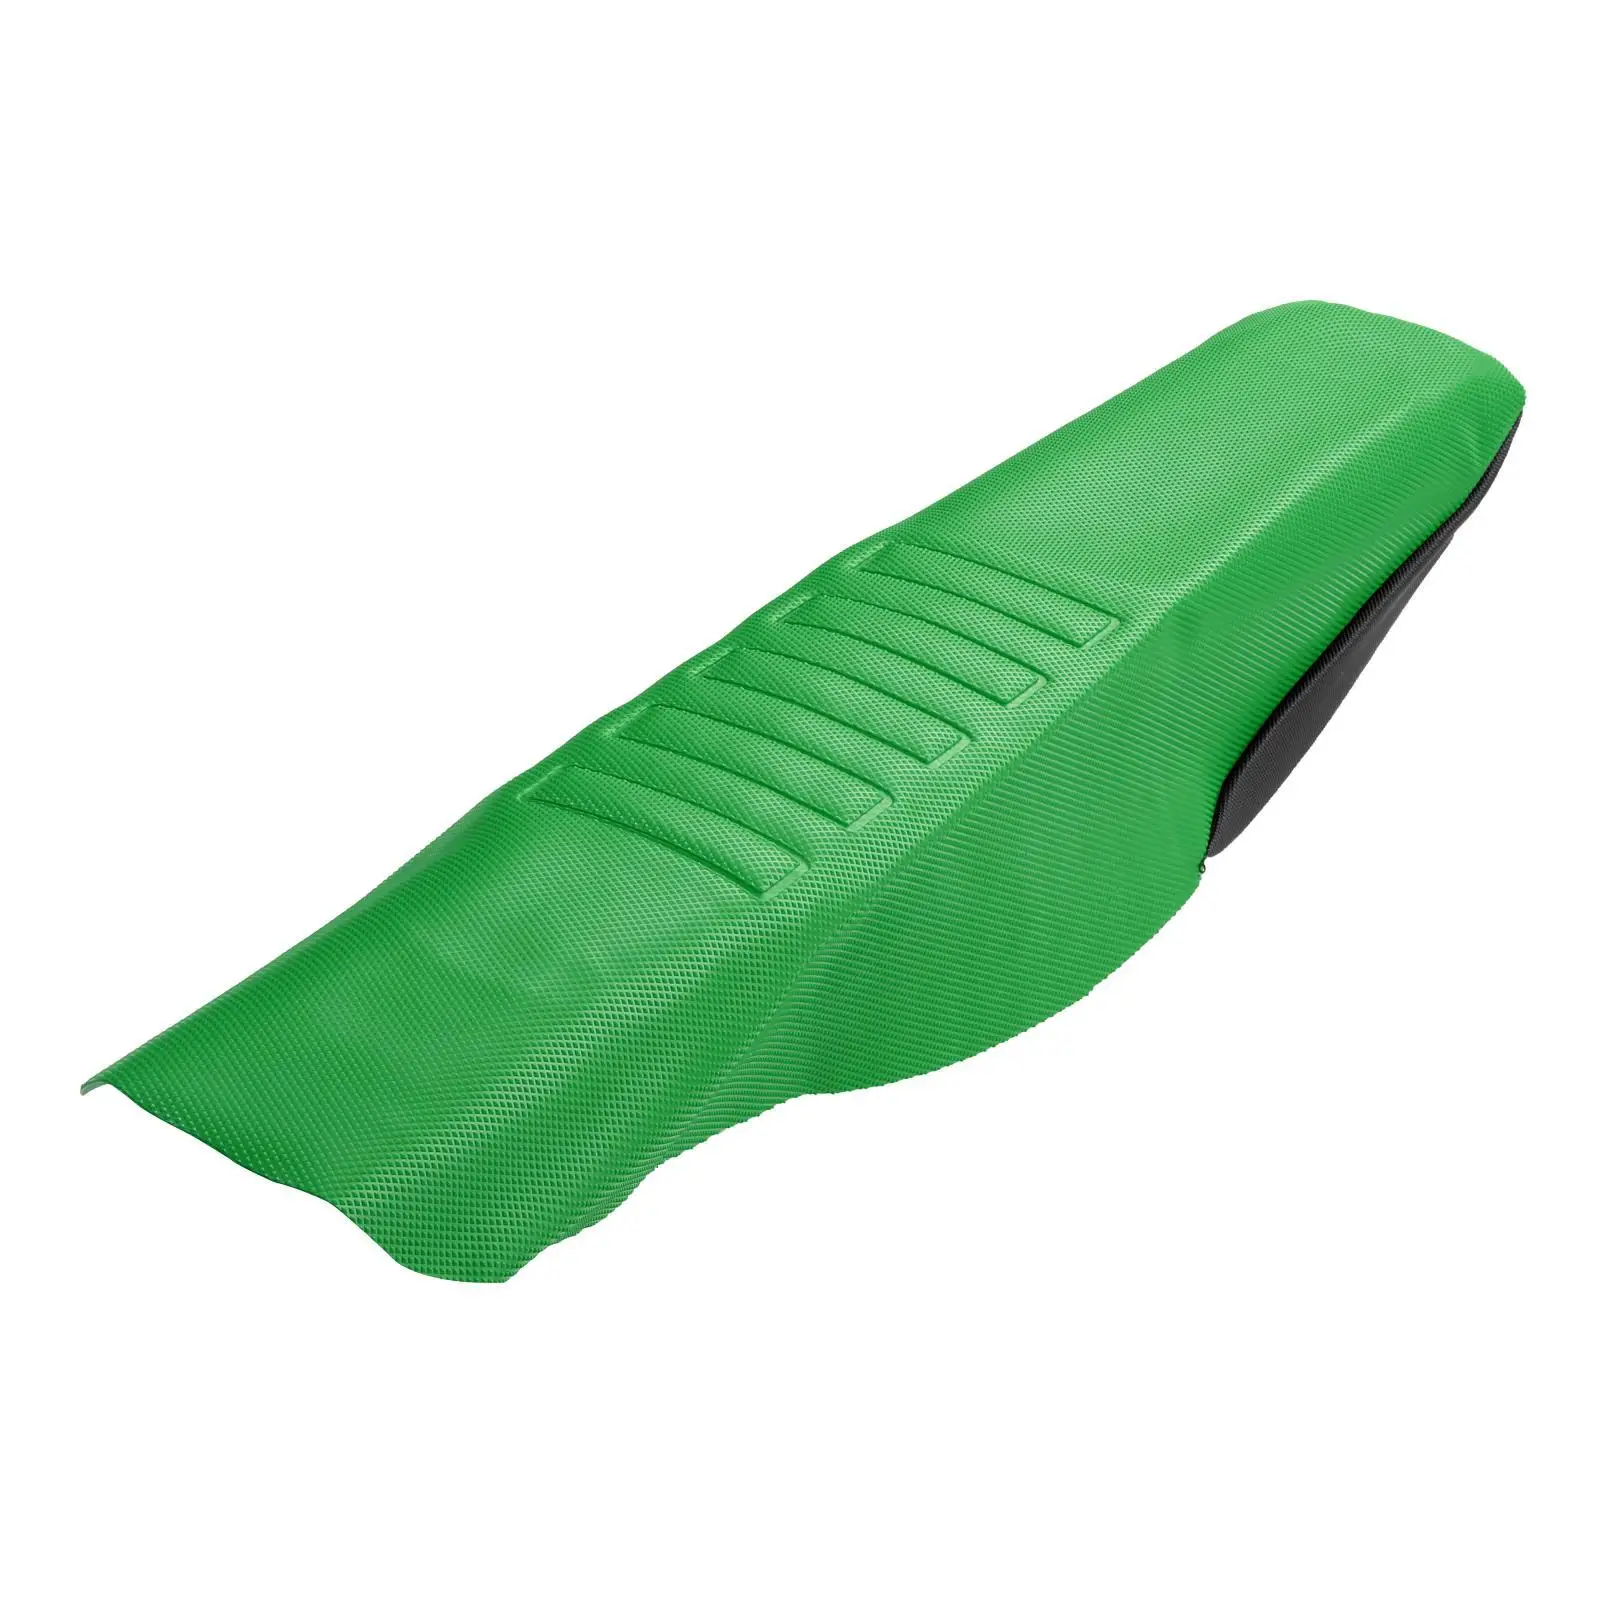 Soft Seat Pad Thick Particles Waterproof Decoration Accessories Non-Slip EVA Material Lightweight Fit for Crf Kxf Yzf